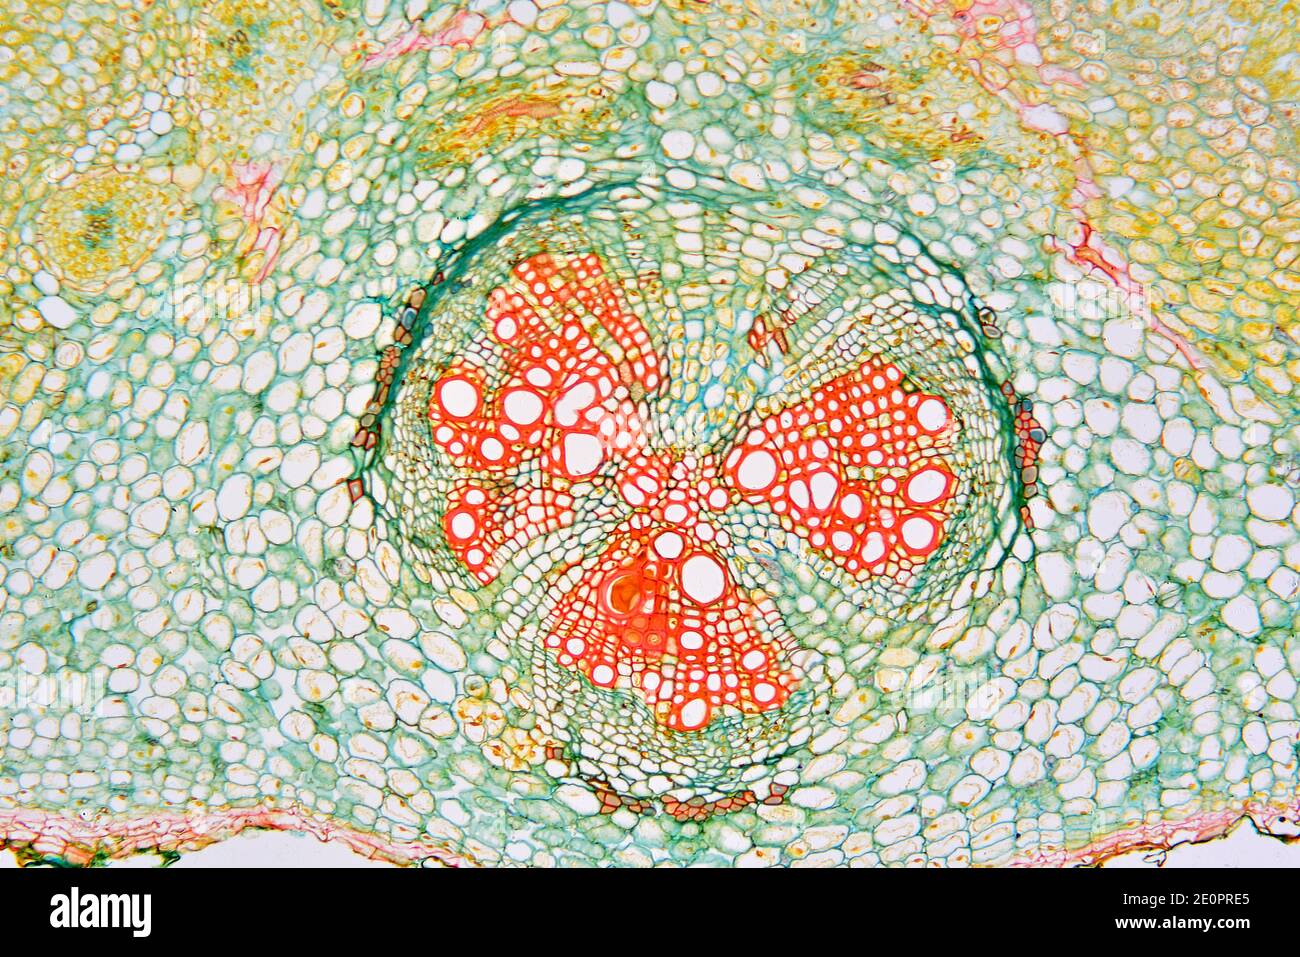 Root of soybean (Glycene max) with vascular bundle. Photomicrograph X50 at 10 cm wide. Stock Photo